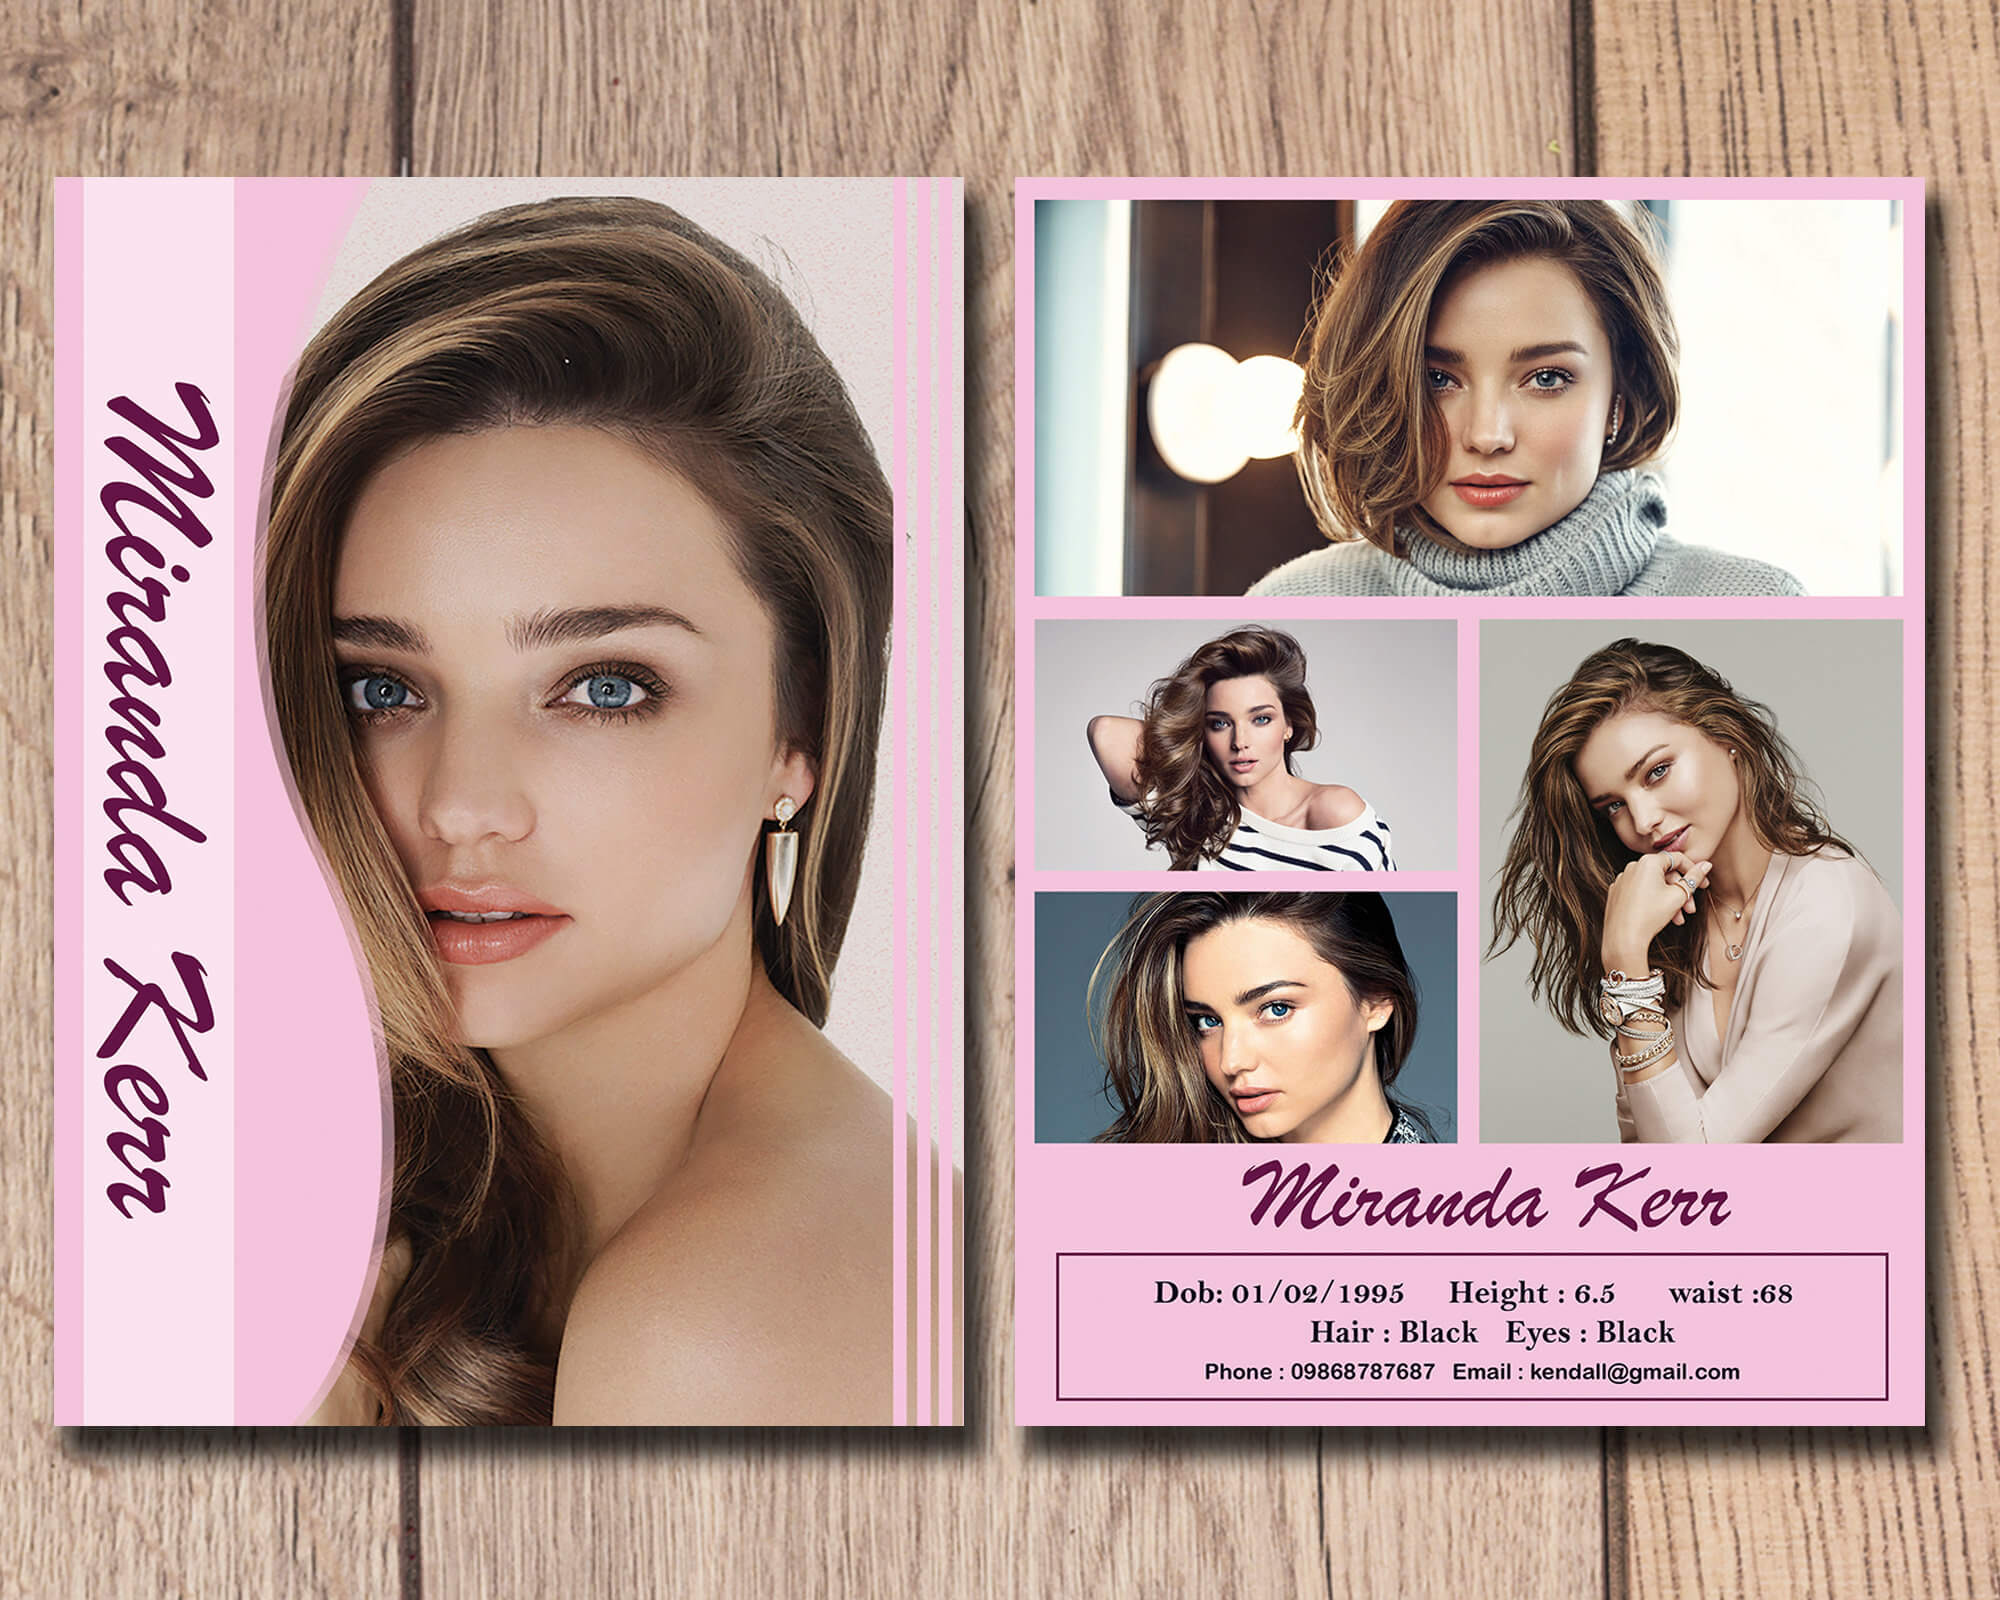 Modeling Comp Card Template | Model Comp Card | Photoshop, Elements & Ms  Word Template | Instant Download Inside Comp Card Template Download